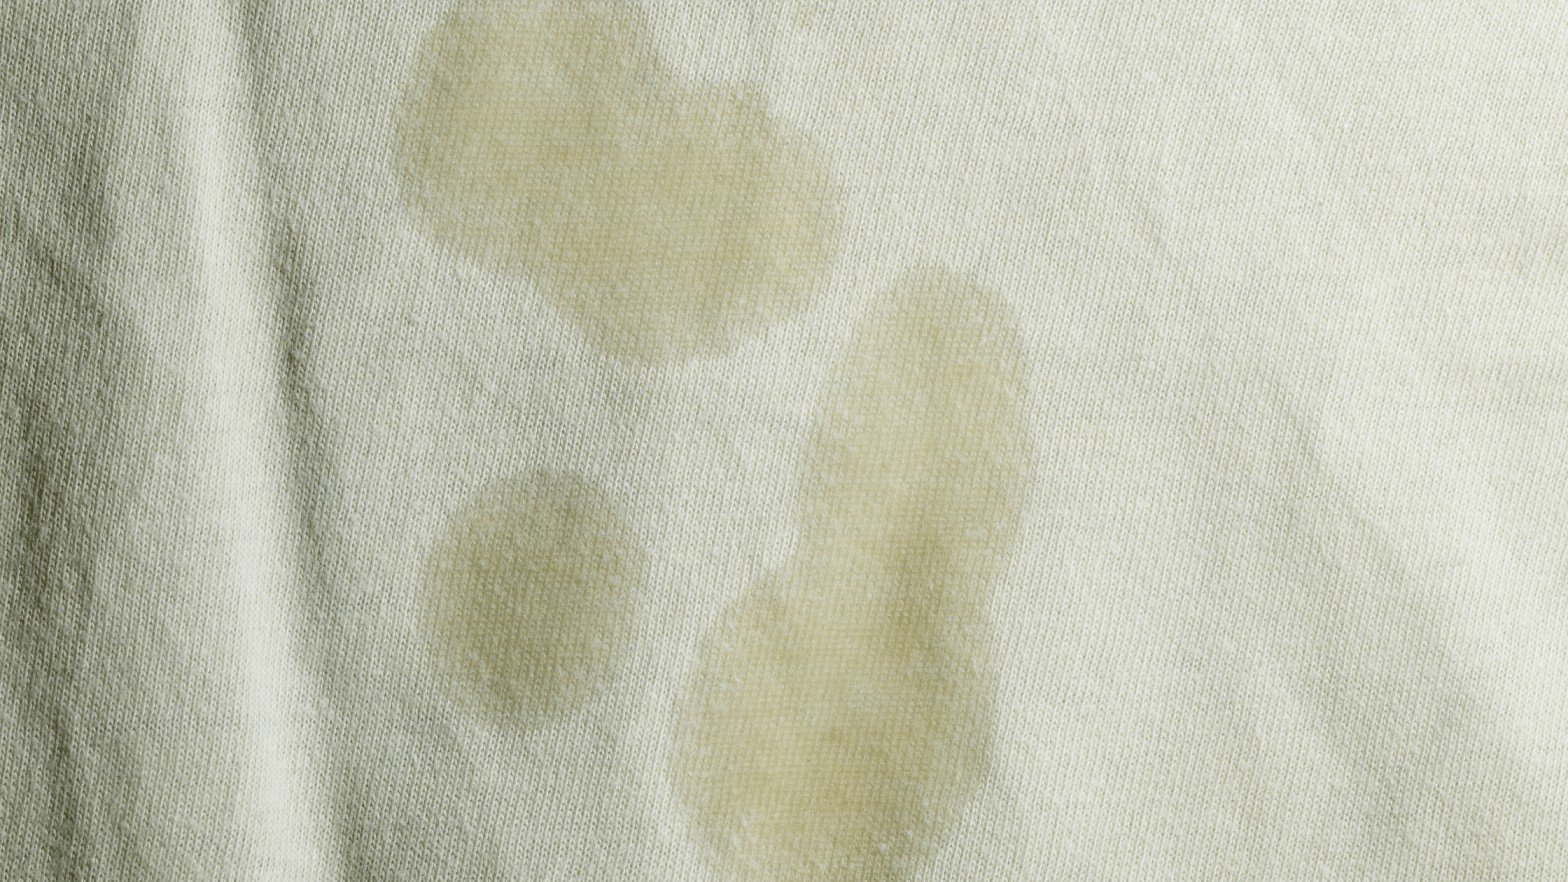 oil stain